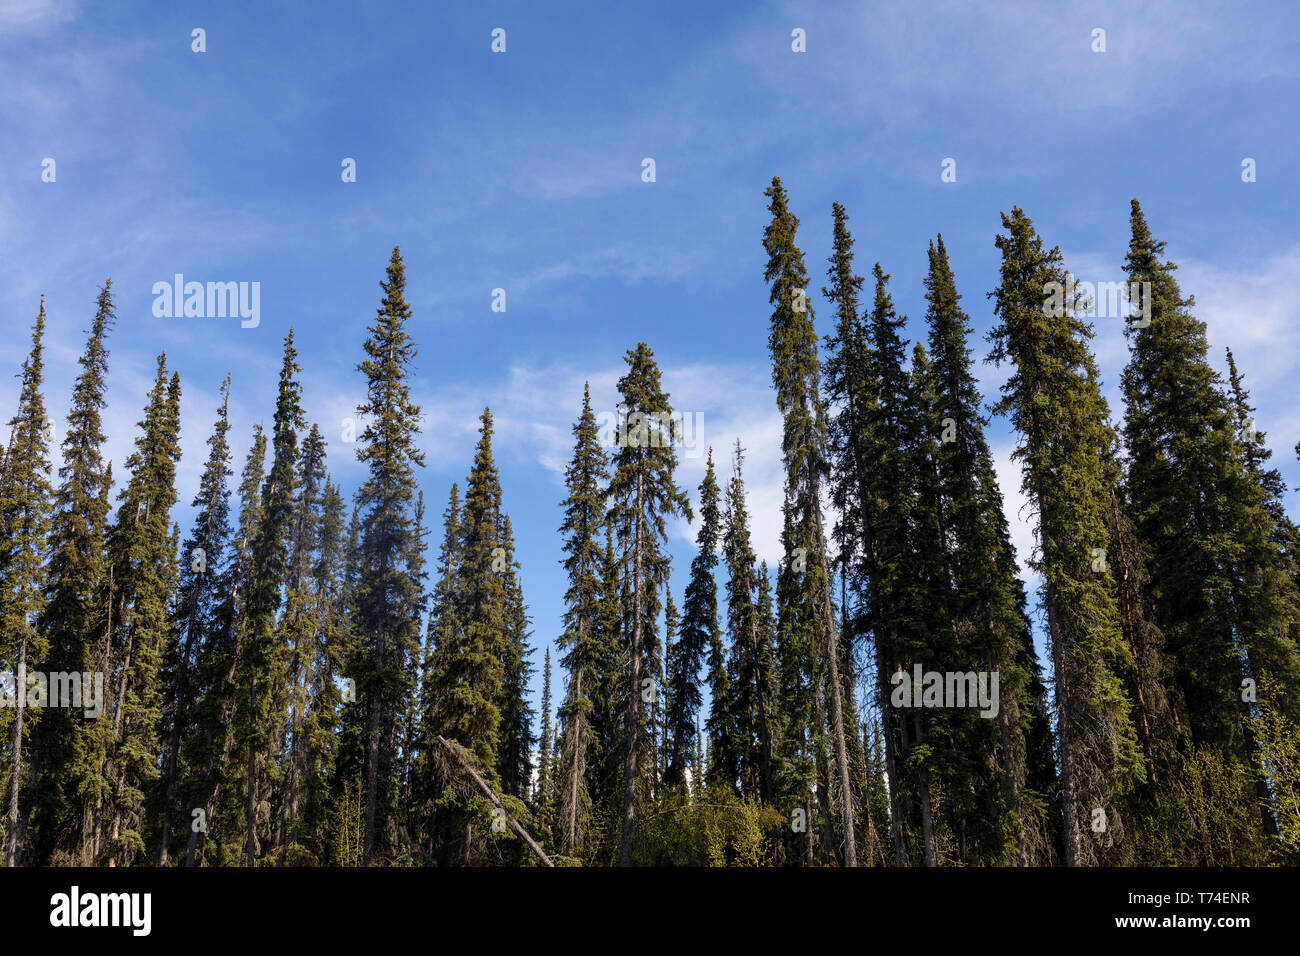 Black spruce (Picea Mariana) forest on the banks of Beaver Creek, National Wild and Scenic Rivers System, White Mountains Stock Photo